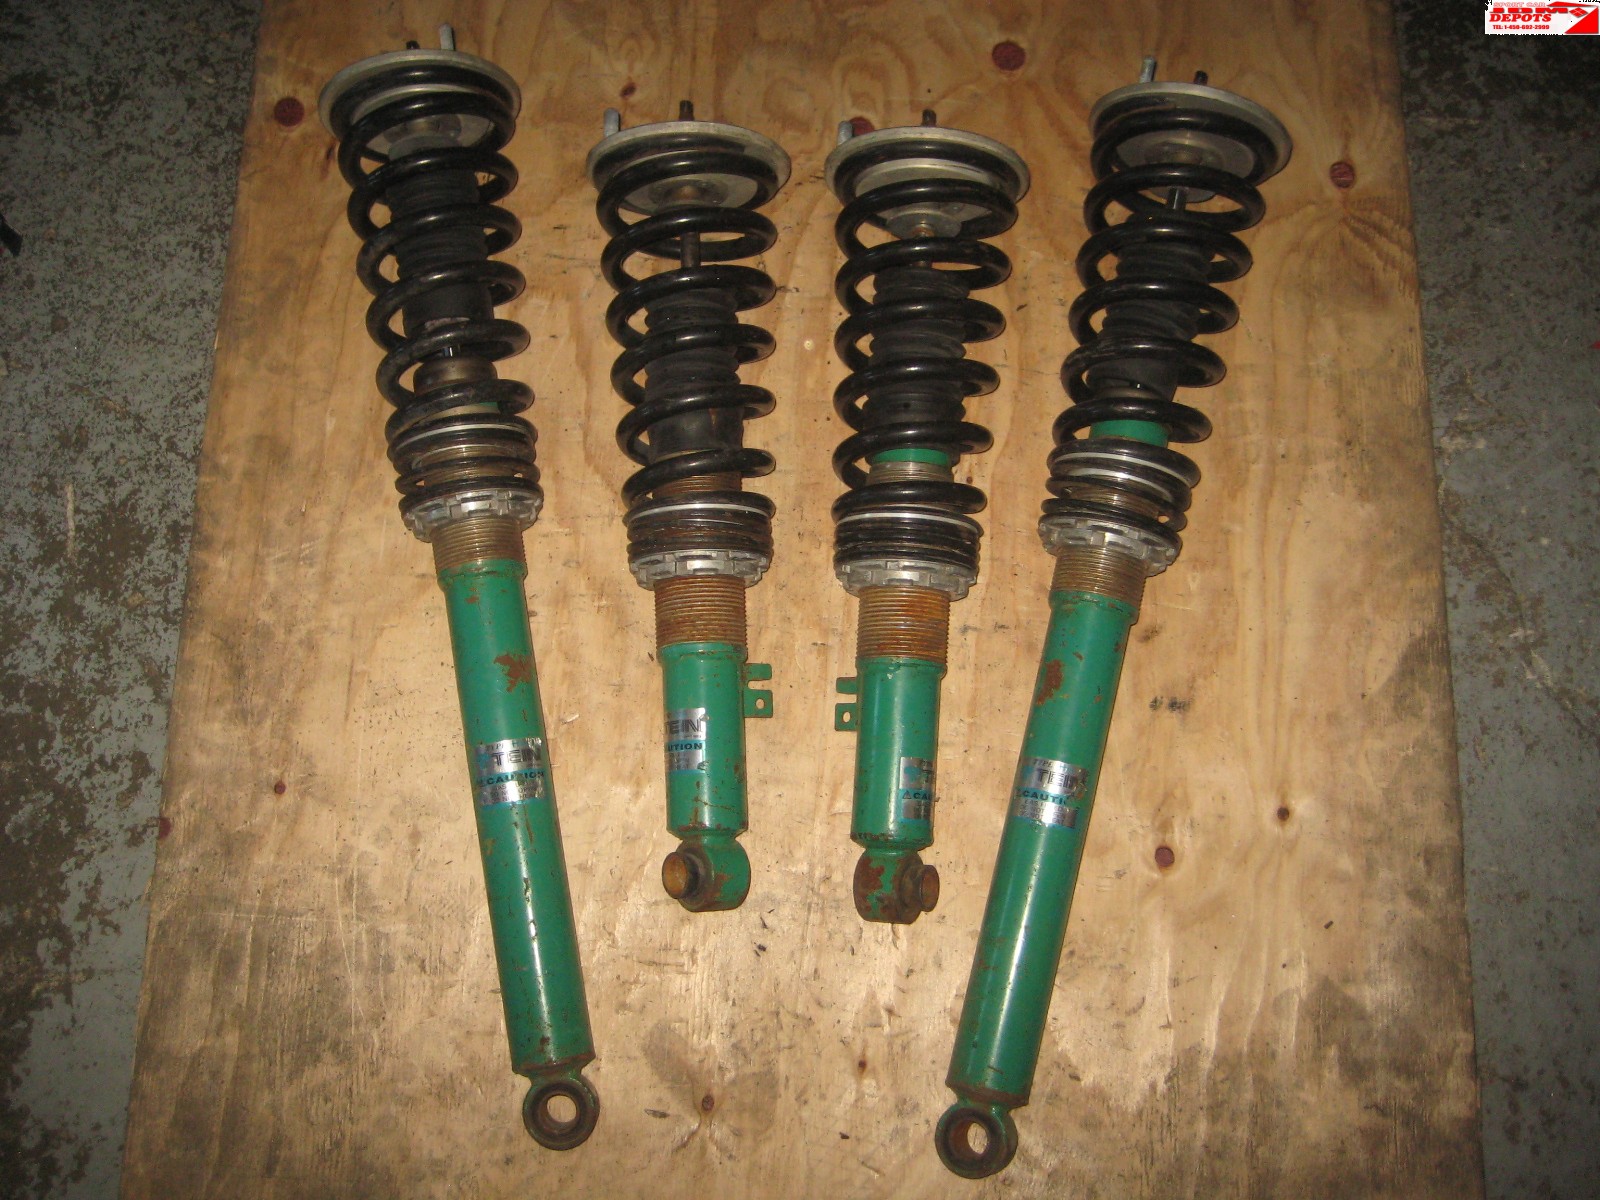 Jdm Nissan R33 Coilovers, Jdm Nissan R33 suspensions, Jdm Nissan R33 adjustable coilovers, Jdm Nissan R33 shocks, Jdm  Nissan R33, Jdm R33 coilovers suspension shocks, Jdm RB25DET coilovers, Jdm RB25DET suspensions, Jdm RB25 shocks, Jdm  Nissan R33 GTS co